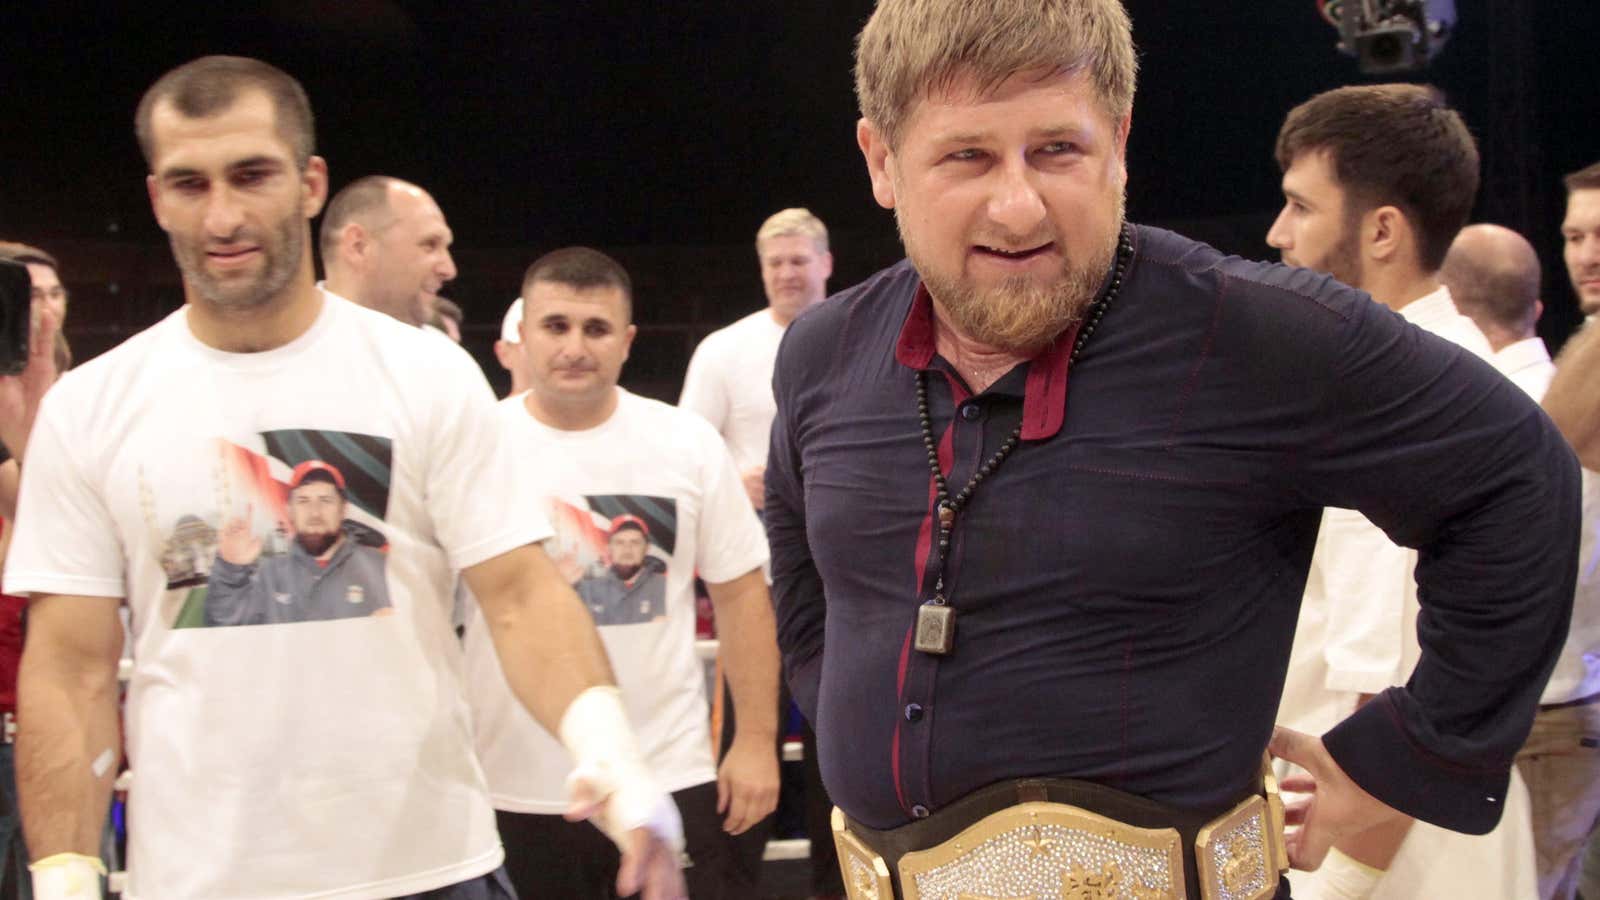 Kadyrov used to have a colorful Instagram presence.